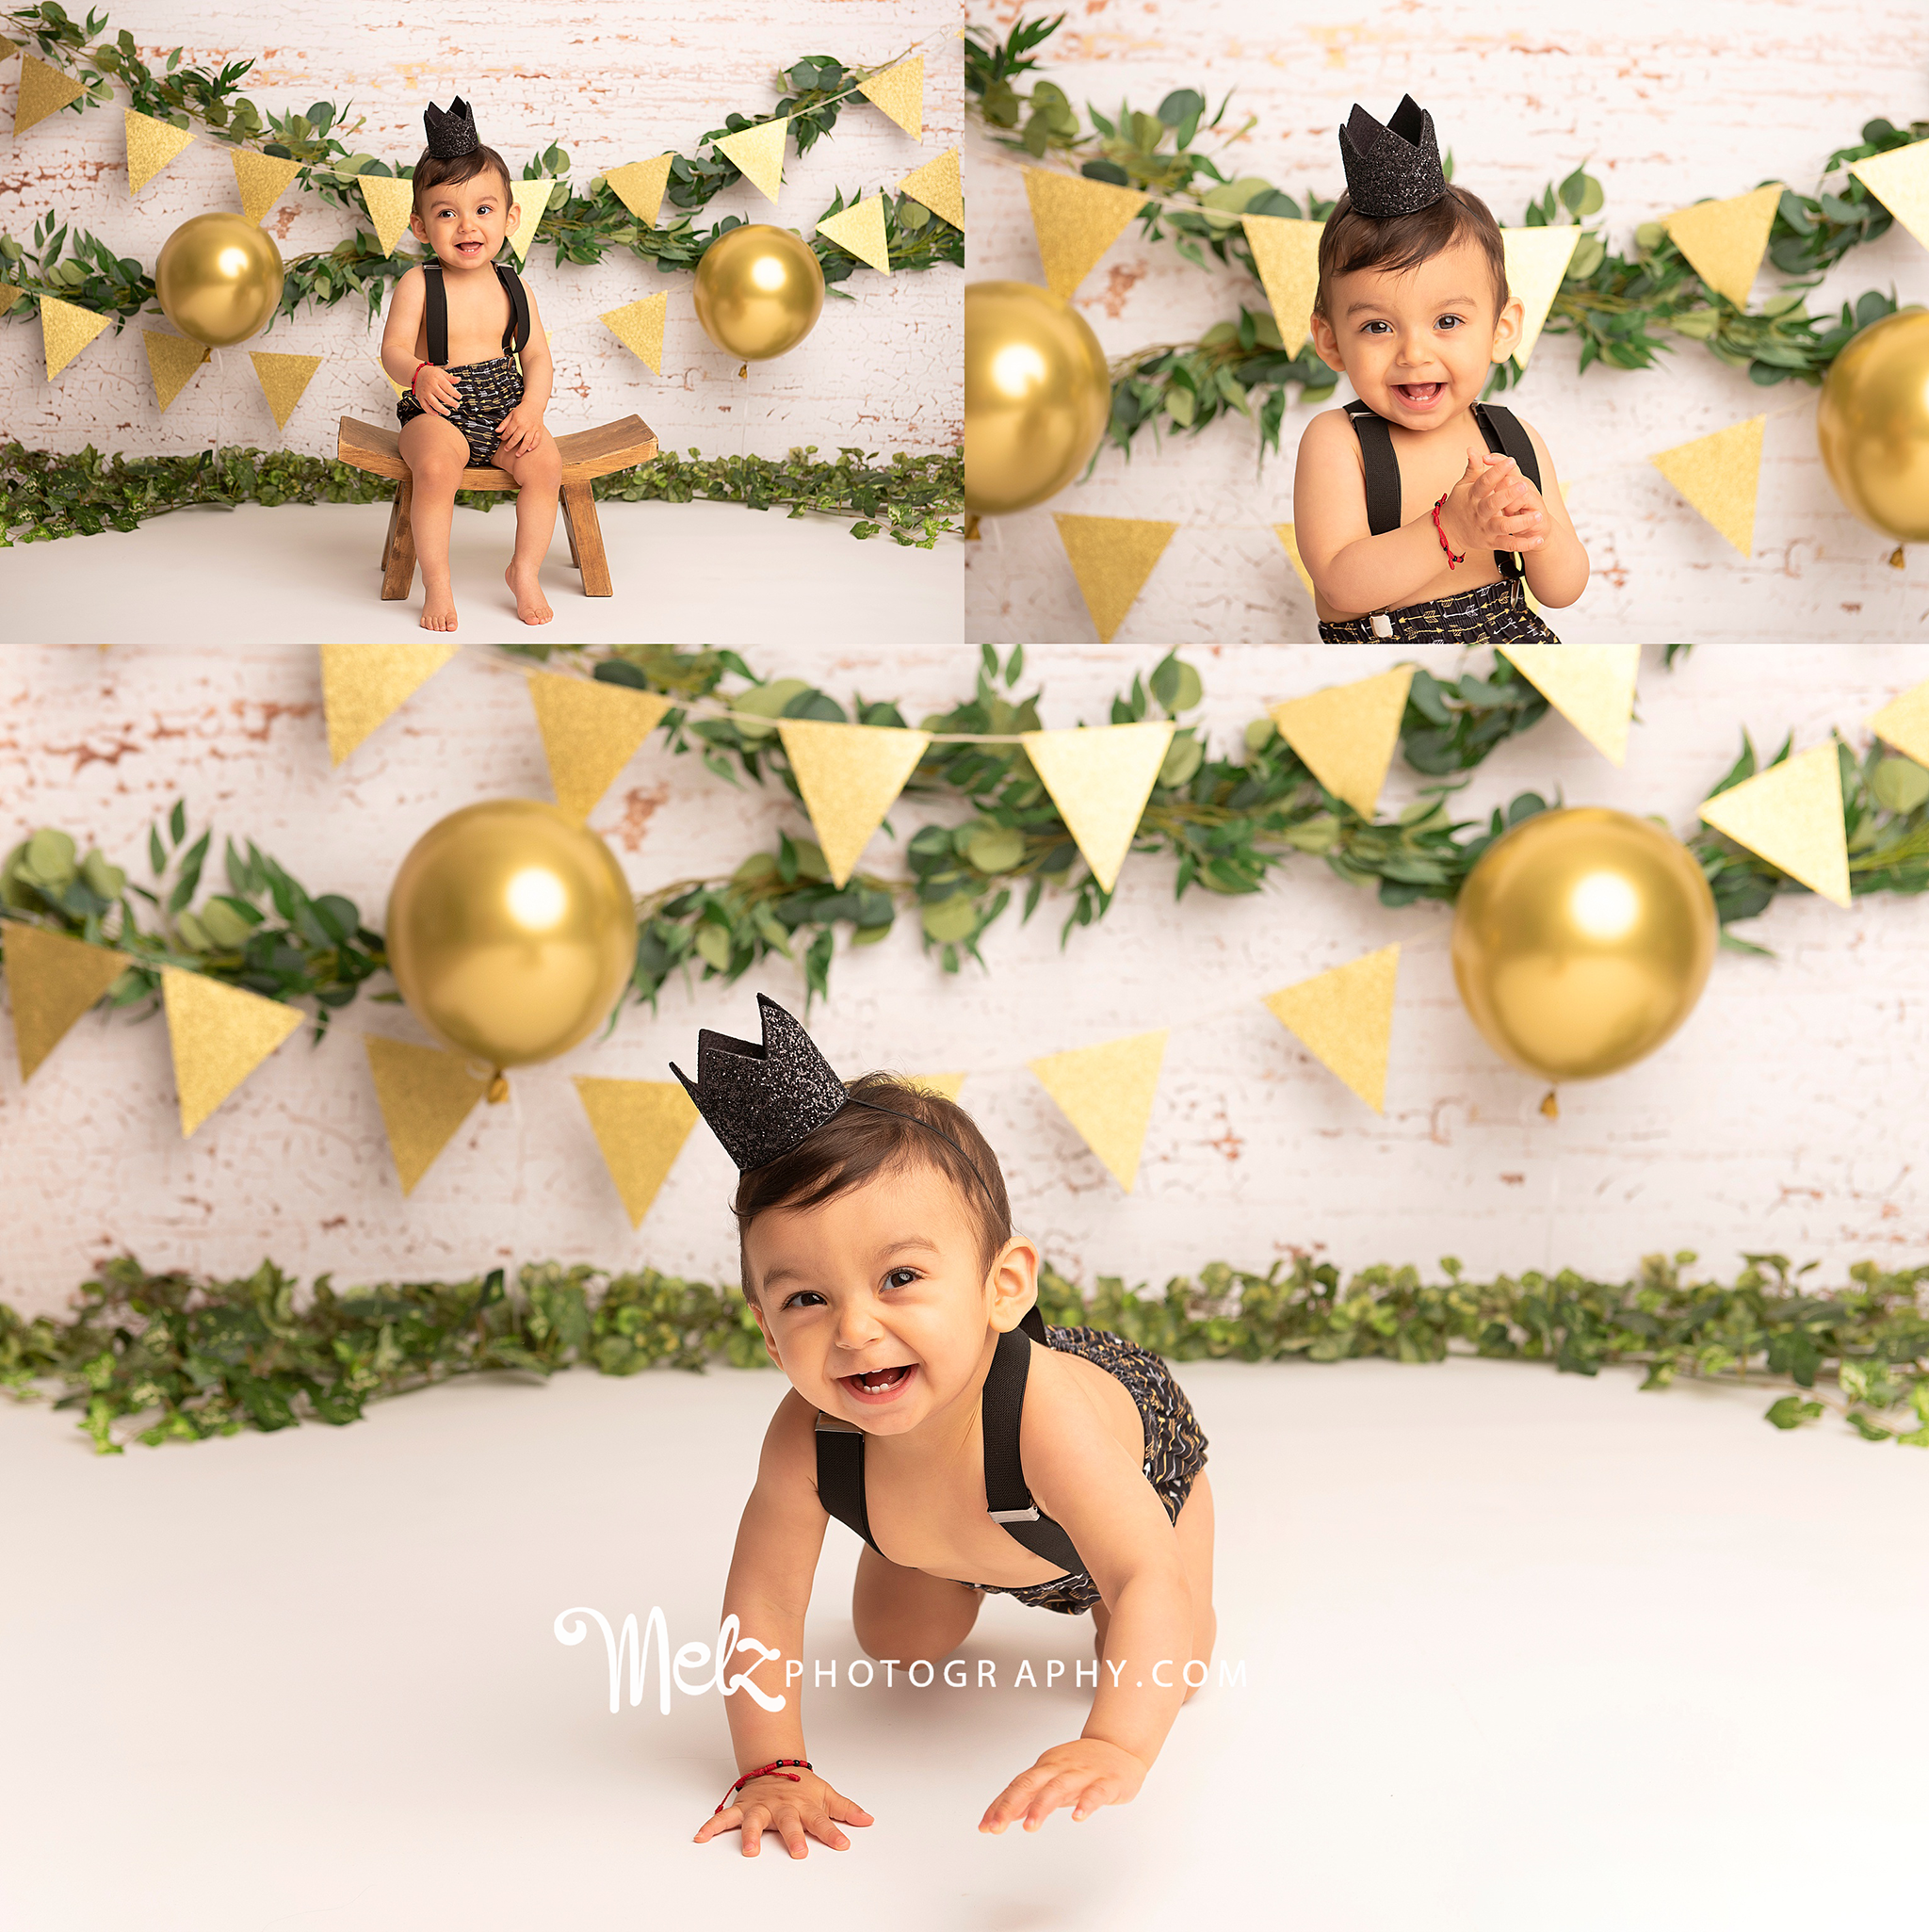 mateos-first-birthday-session-belleville-new-jersey-birthday-photographer-melz-photography-2.png